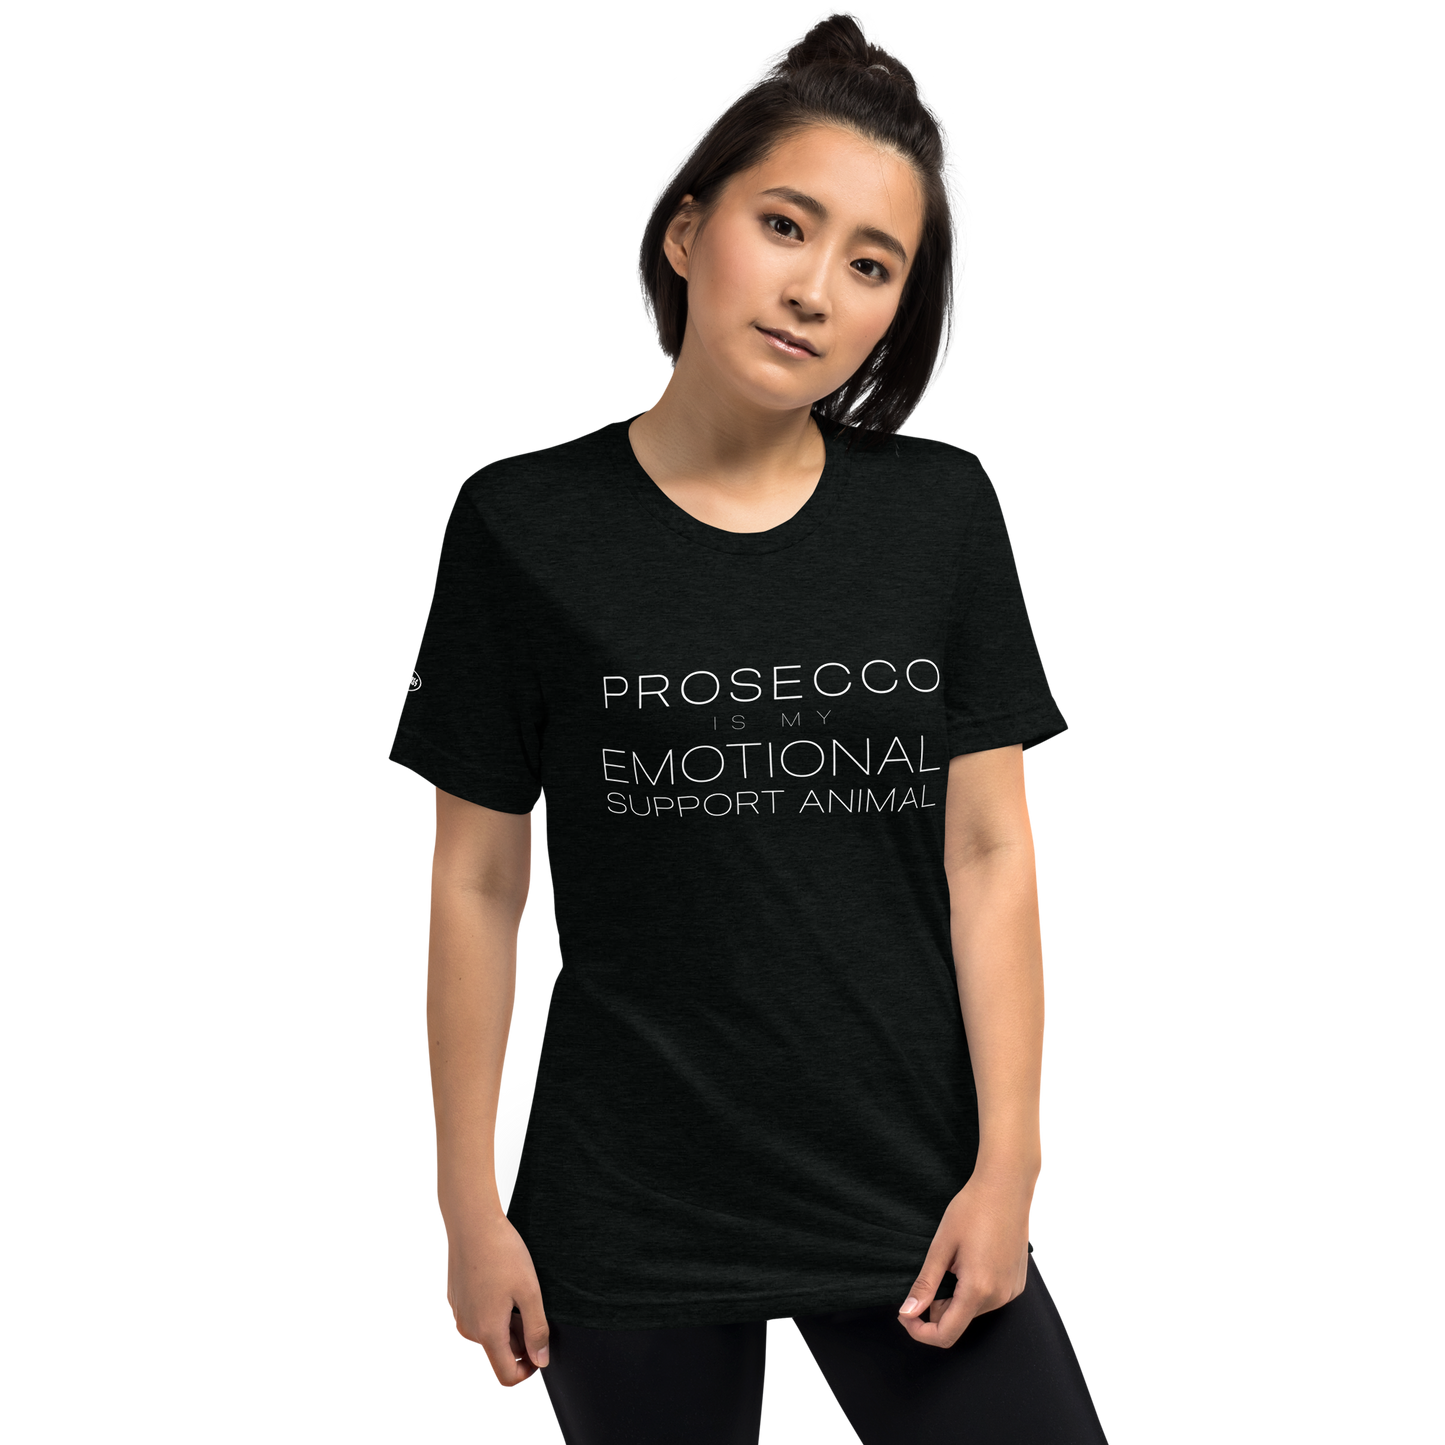 ALCOHOL - Prosecco is my Emotional Support Animal - Funny T-Shirt